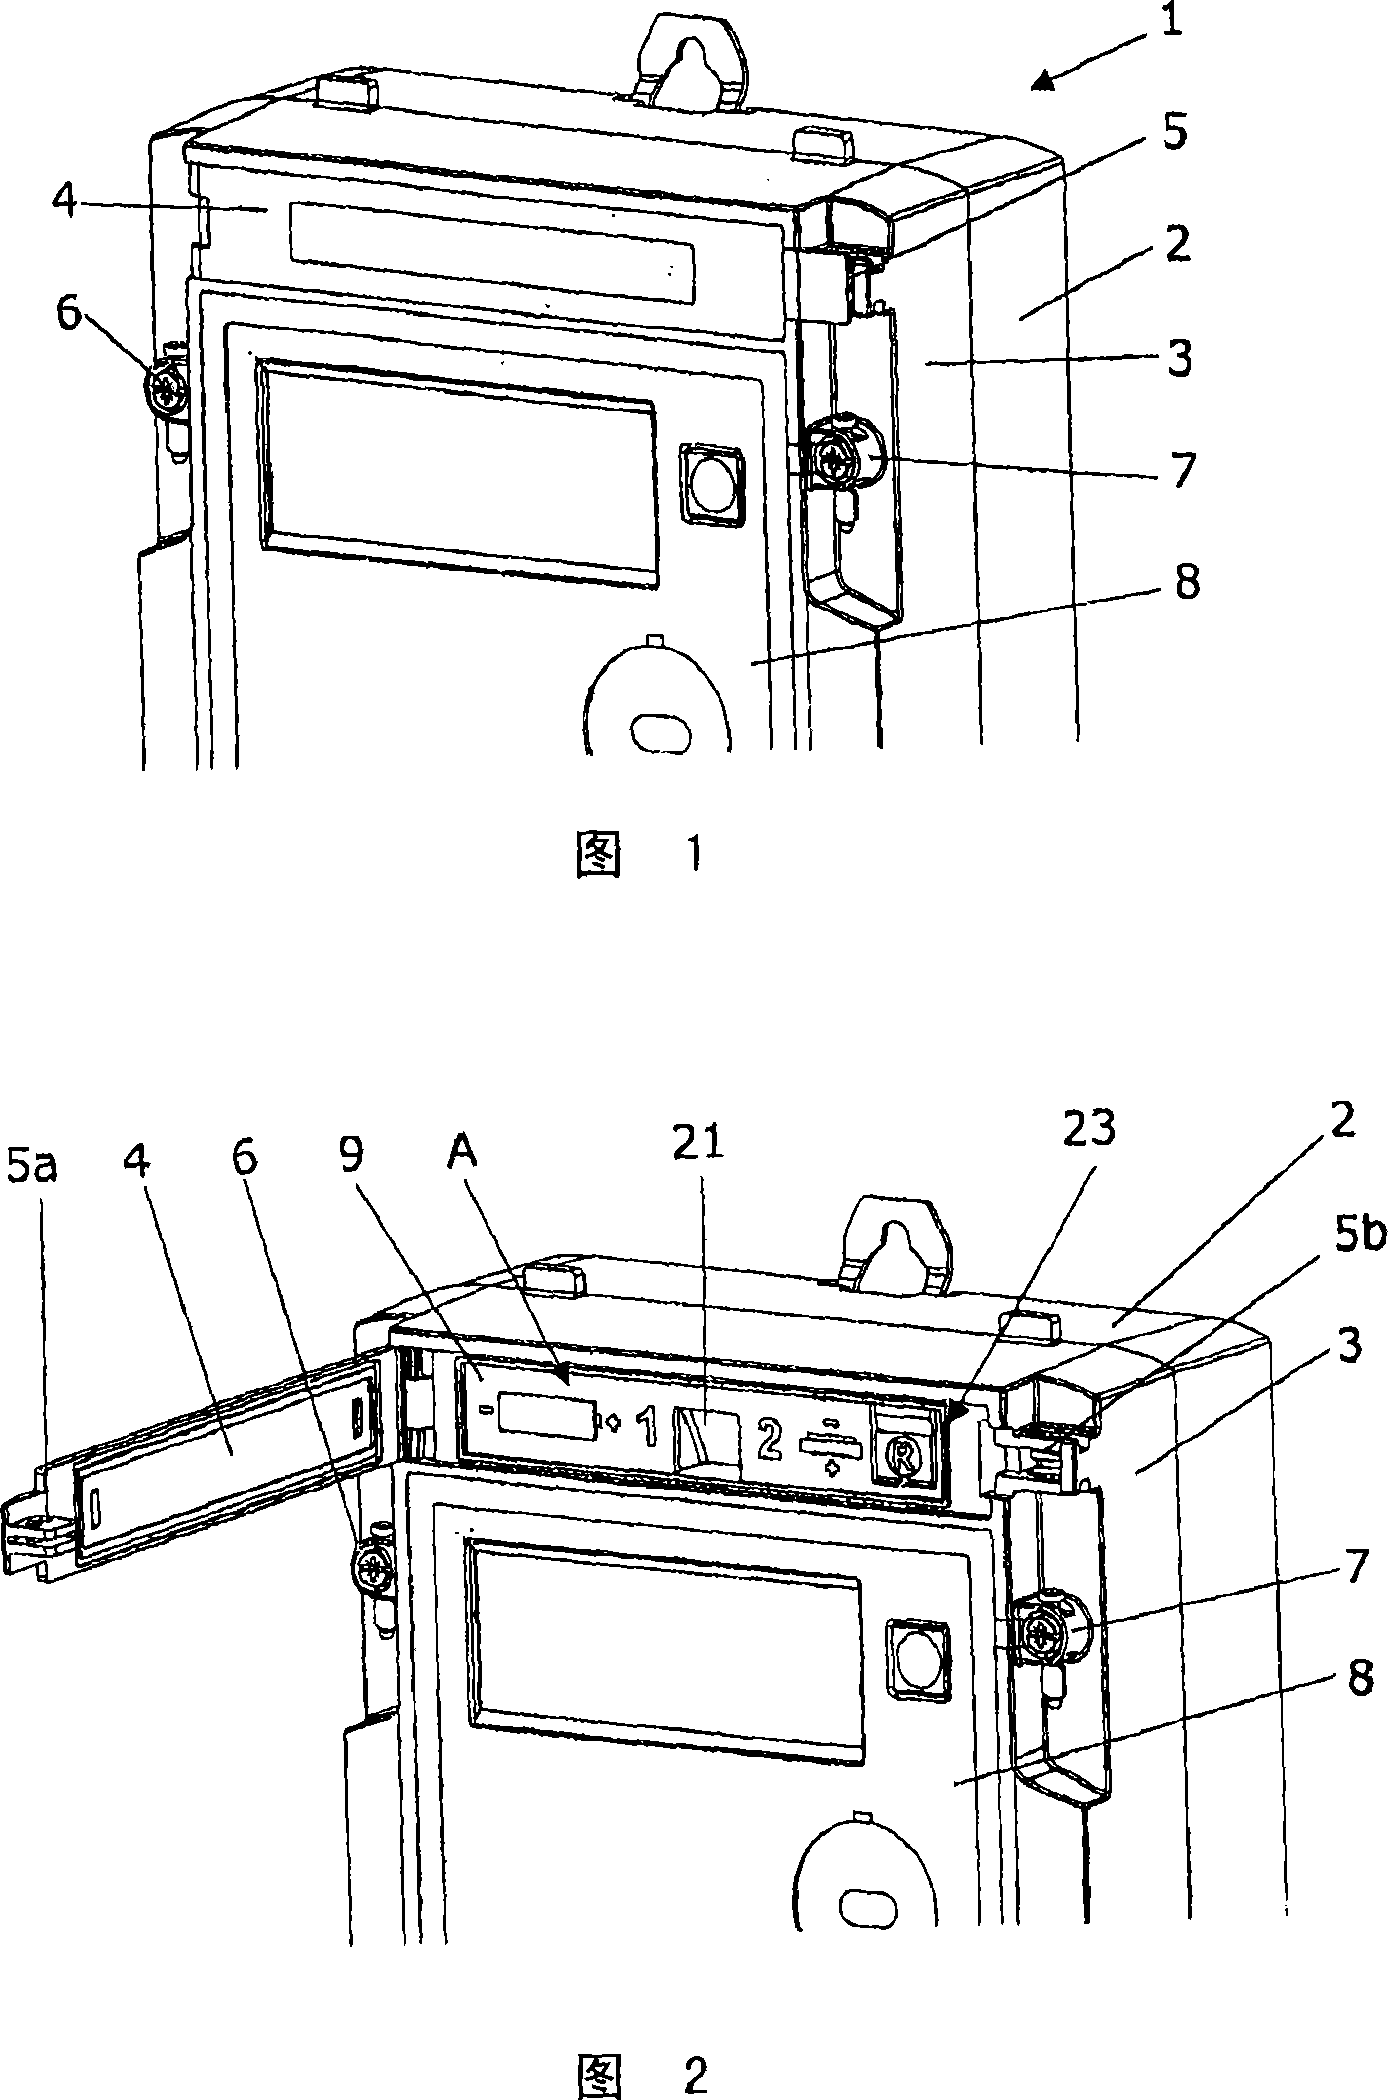 Functional unit for an electrical or electronic appliance